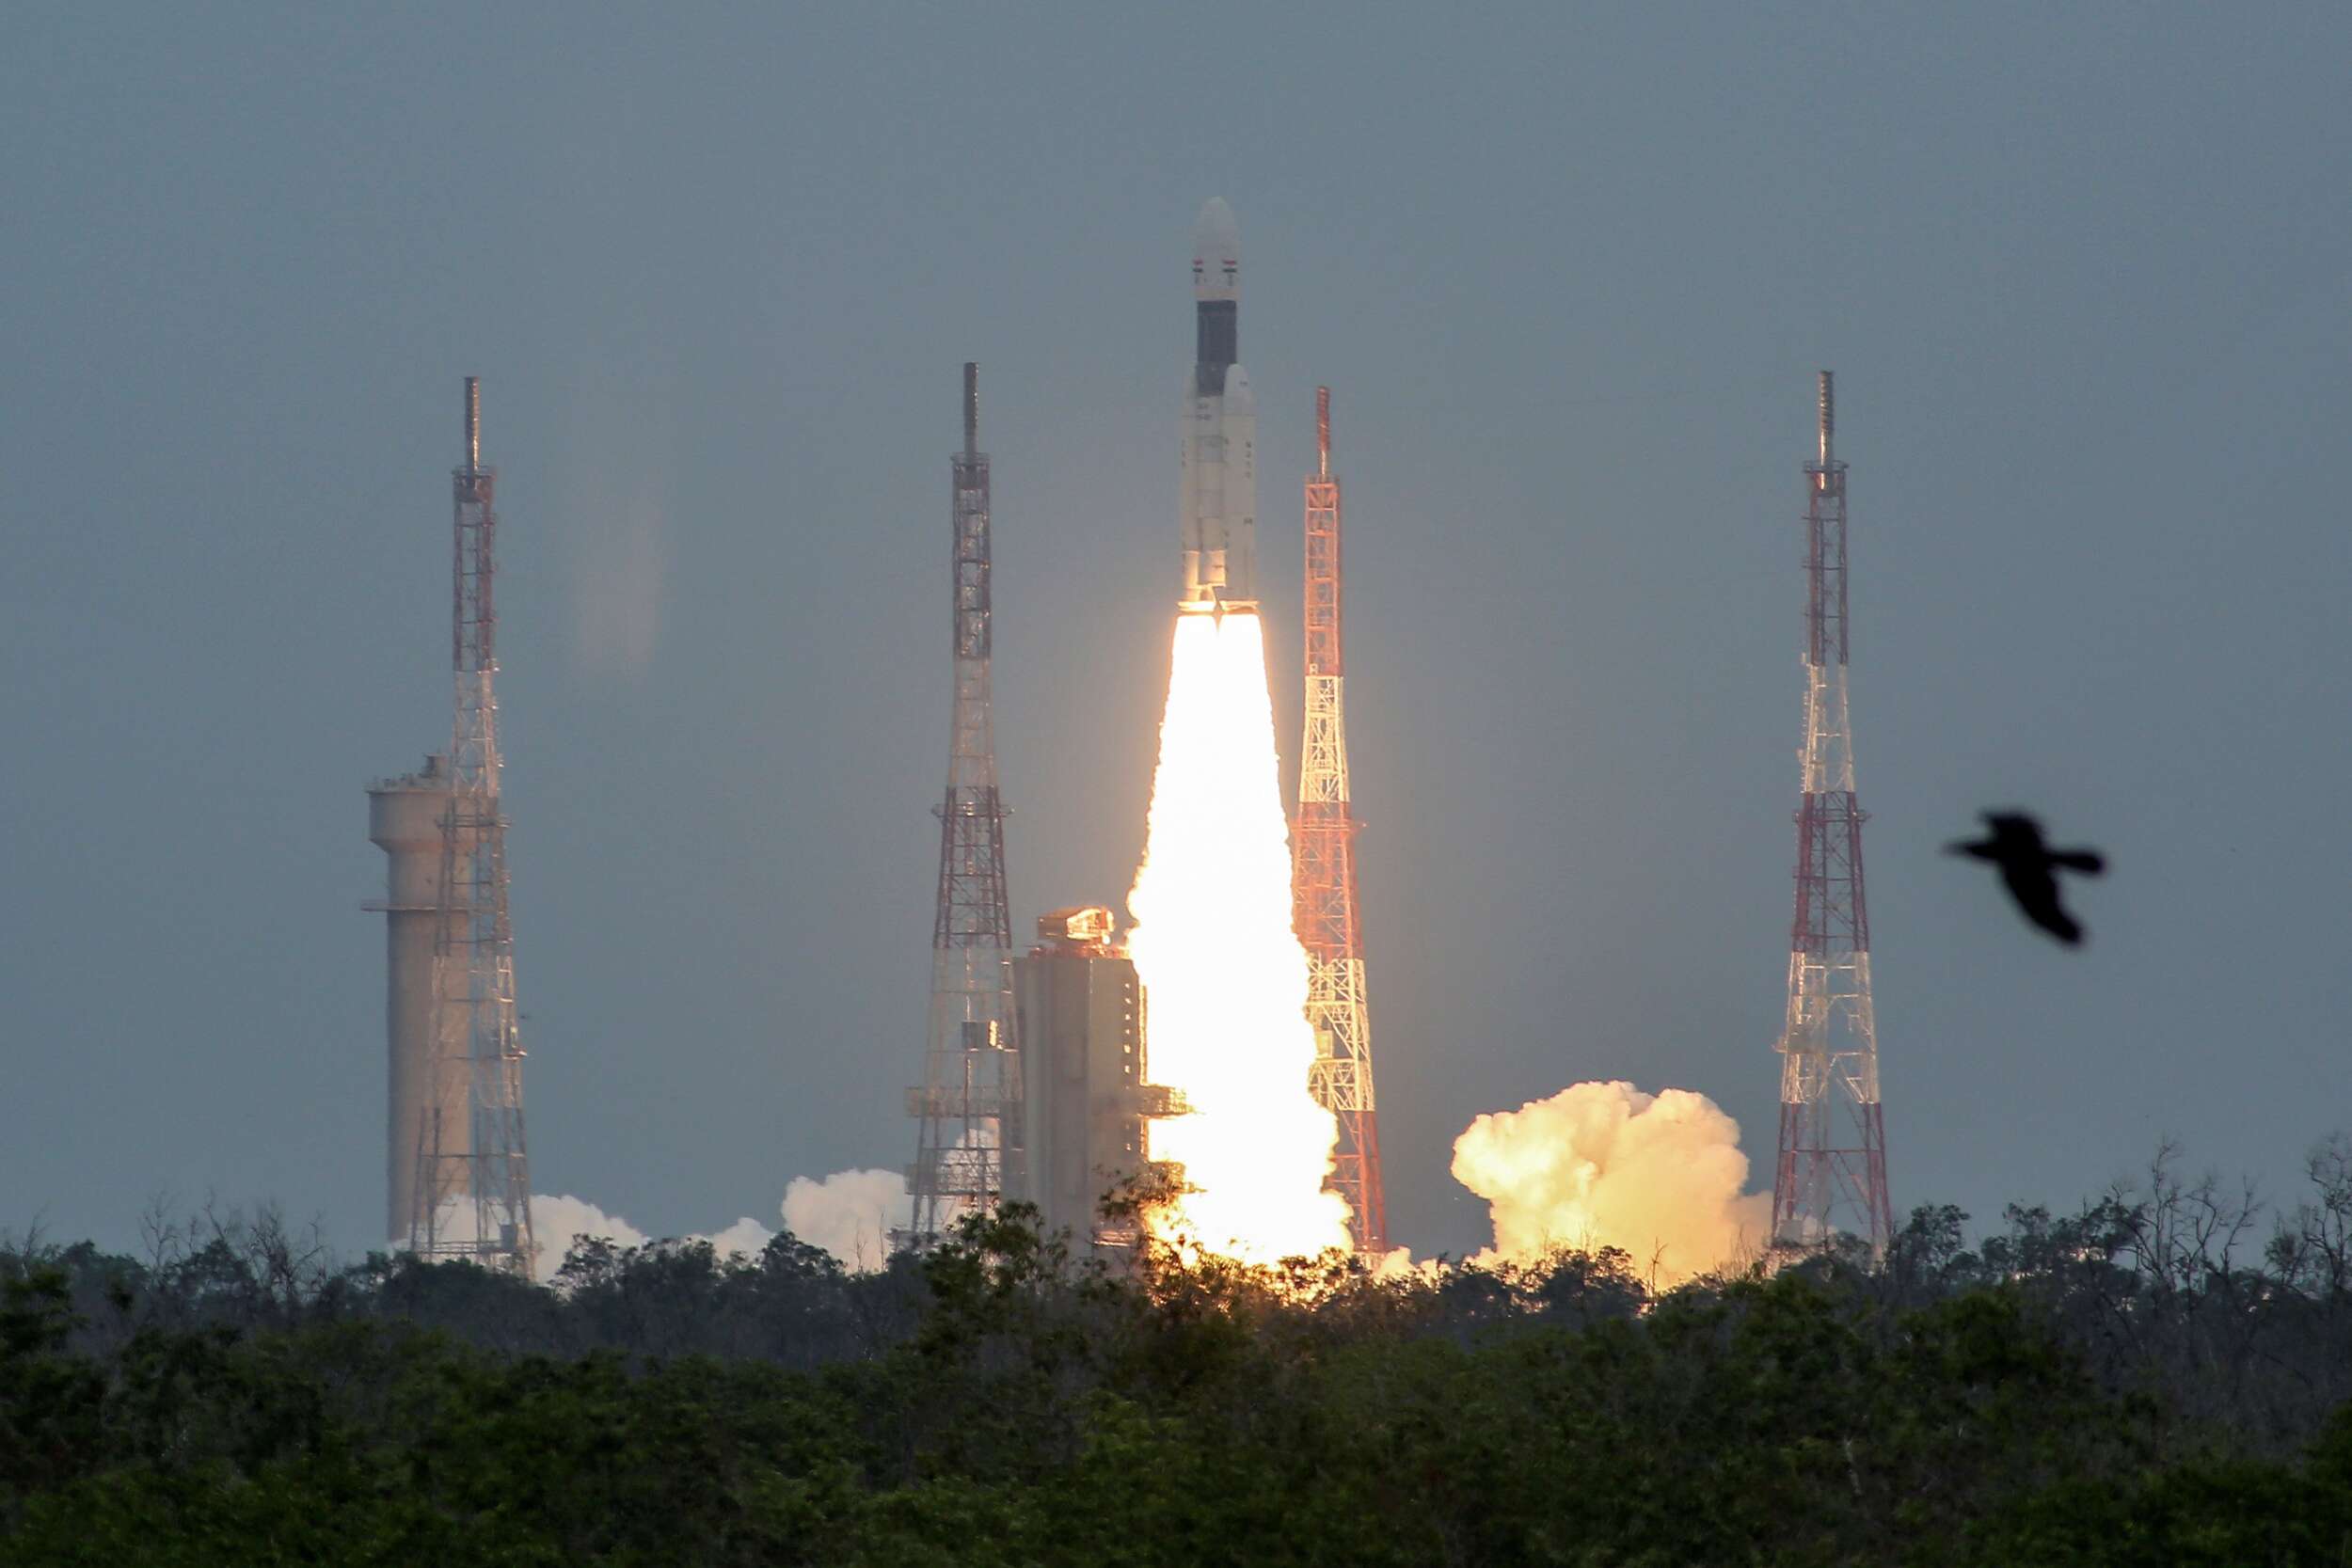 2008 India Launches its First Lunar Mission